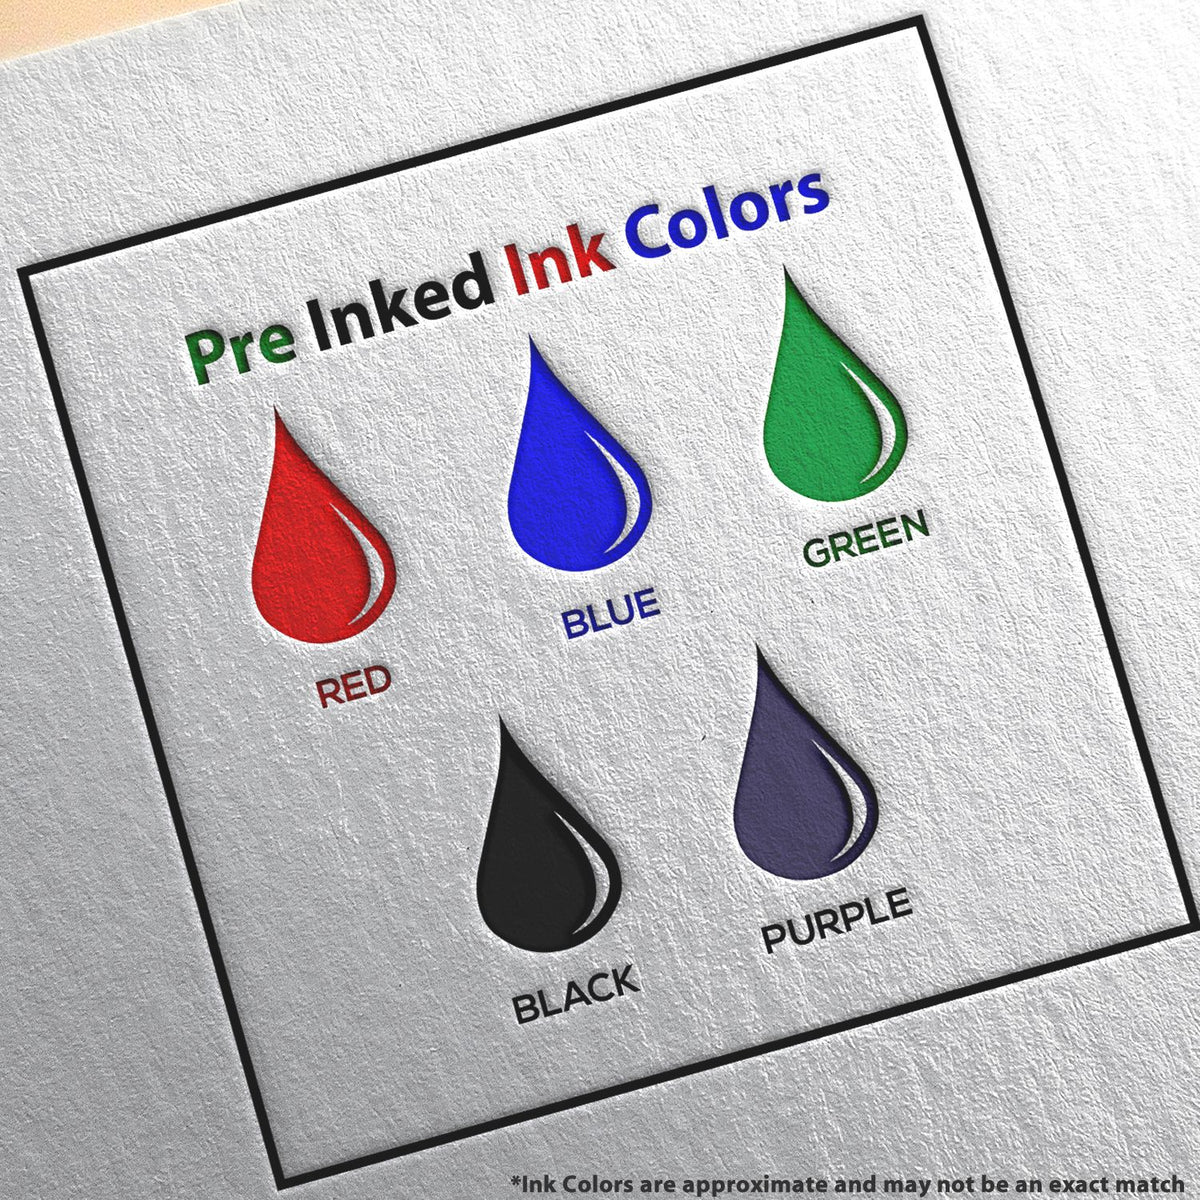 A picture showing the different ink colors or hues available for the Slim Pre-Inked Guam Professional Engineer Seal Stamp product.